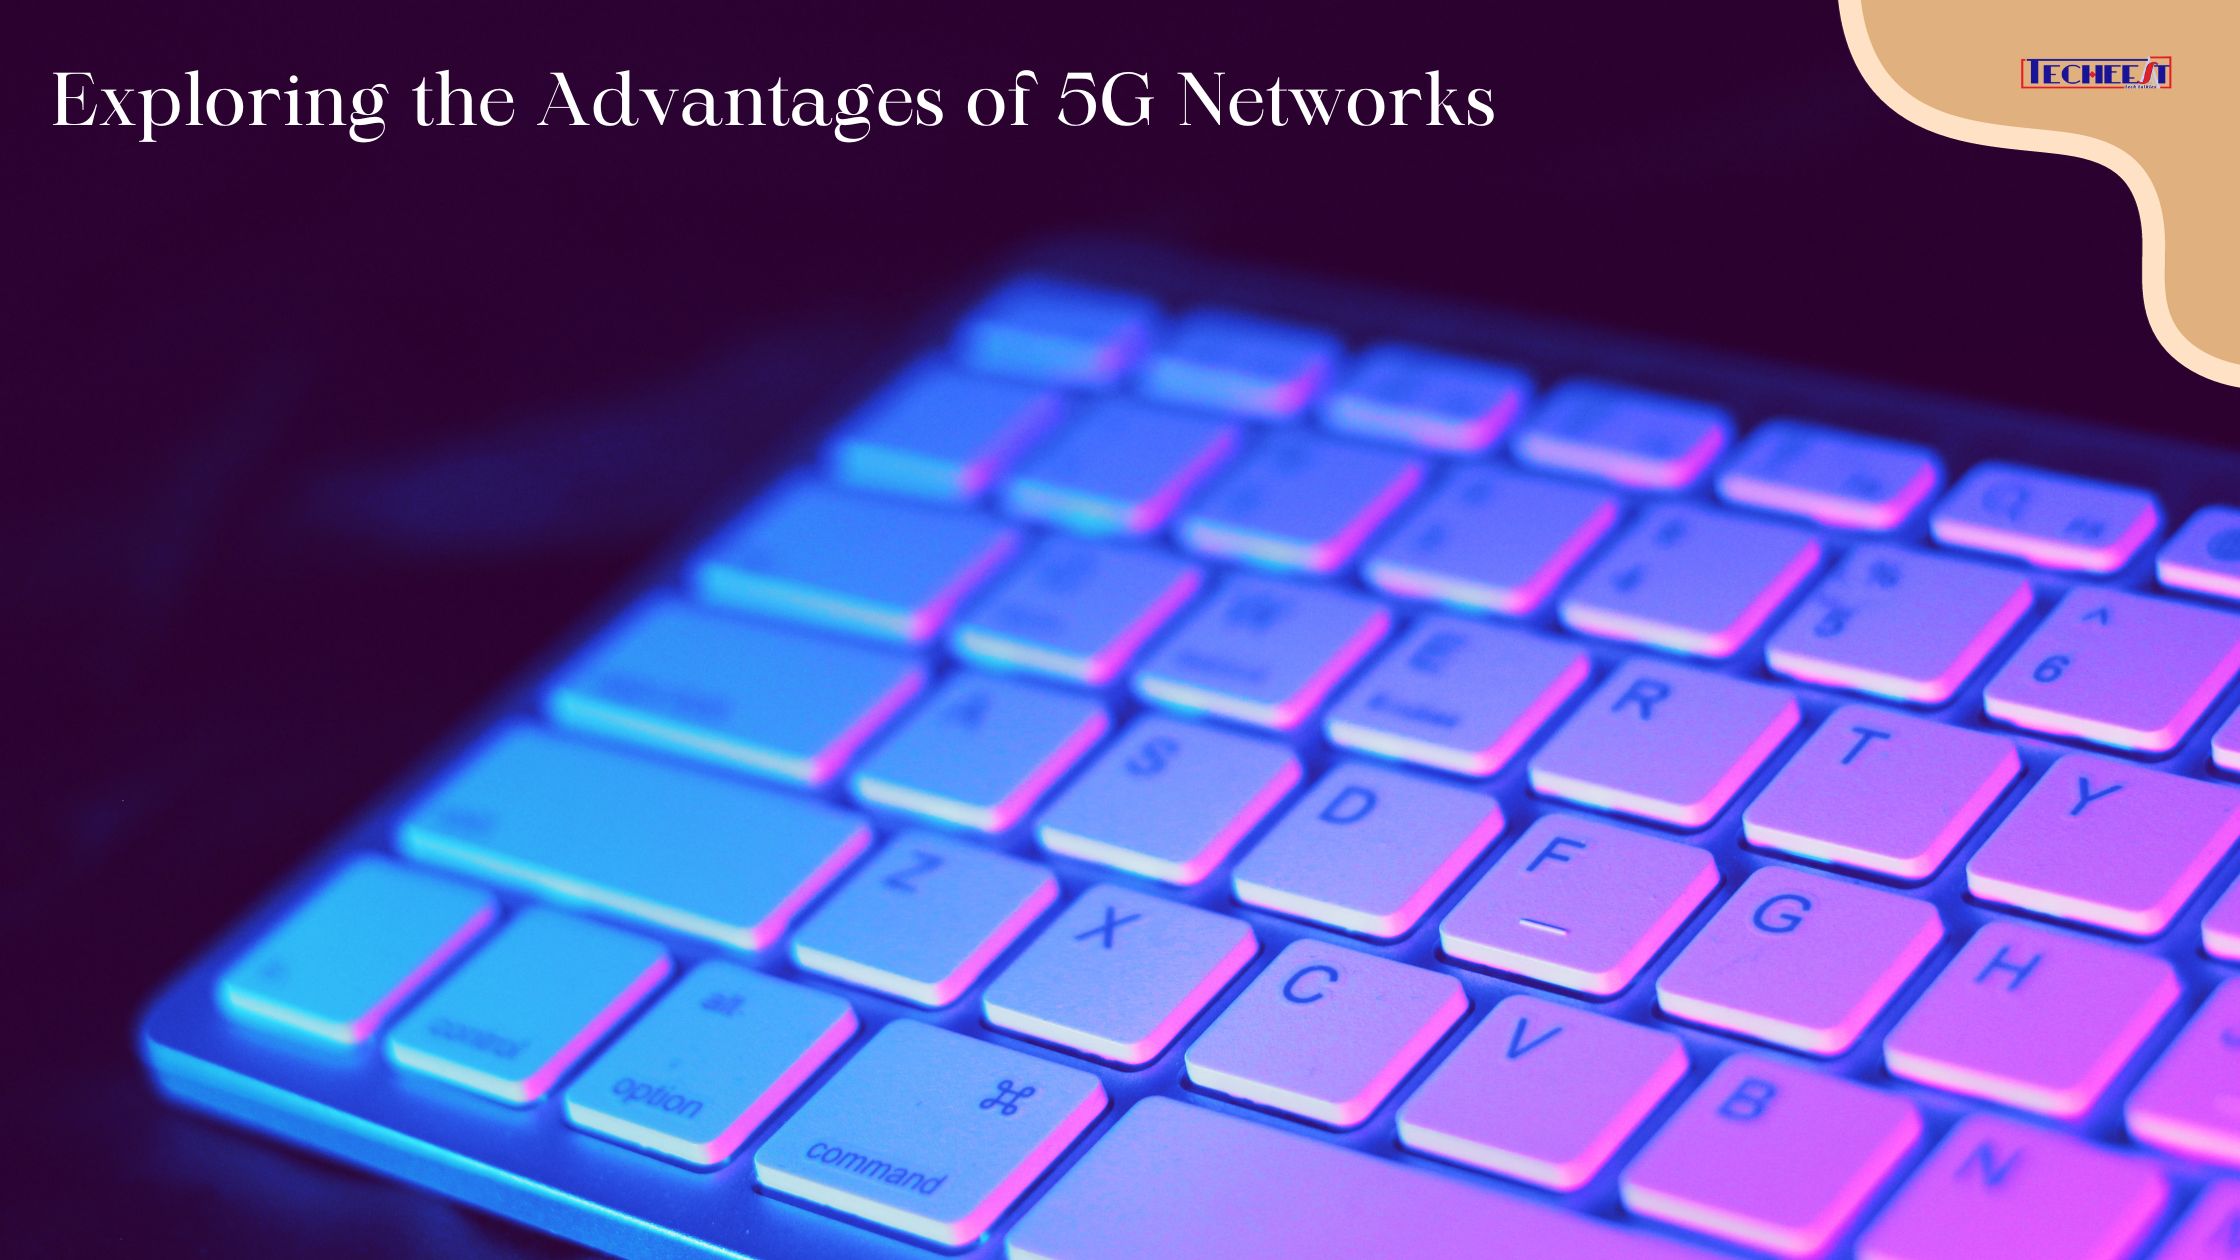 The Future Is Here Exploring the Advantages of 5G Networks